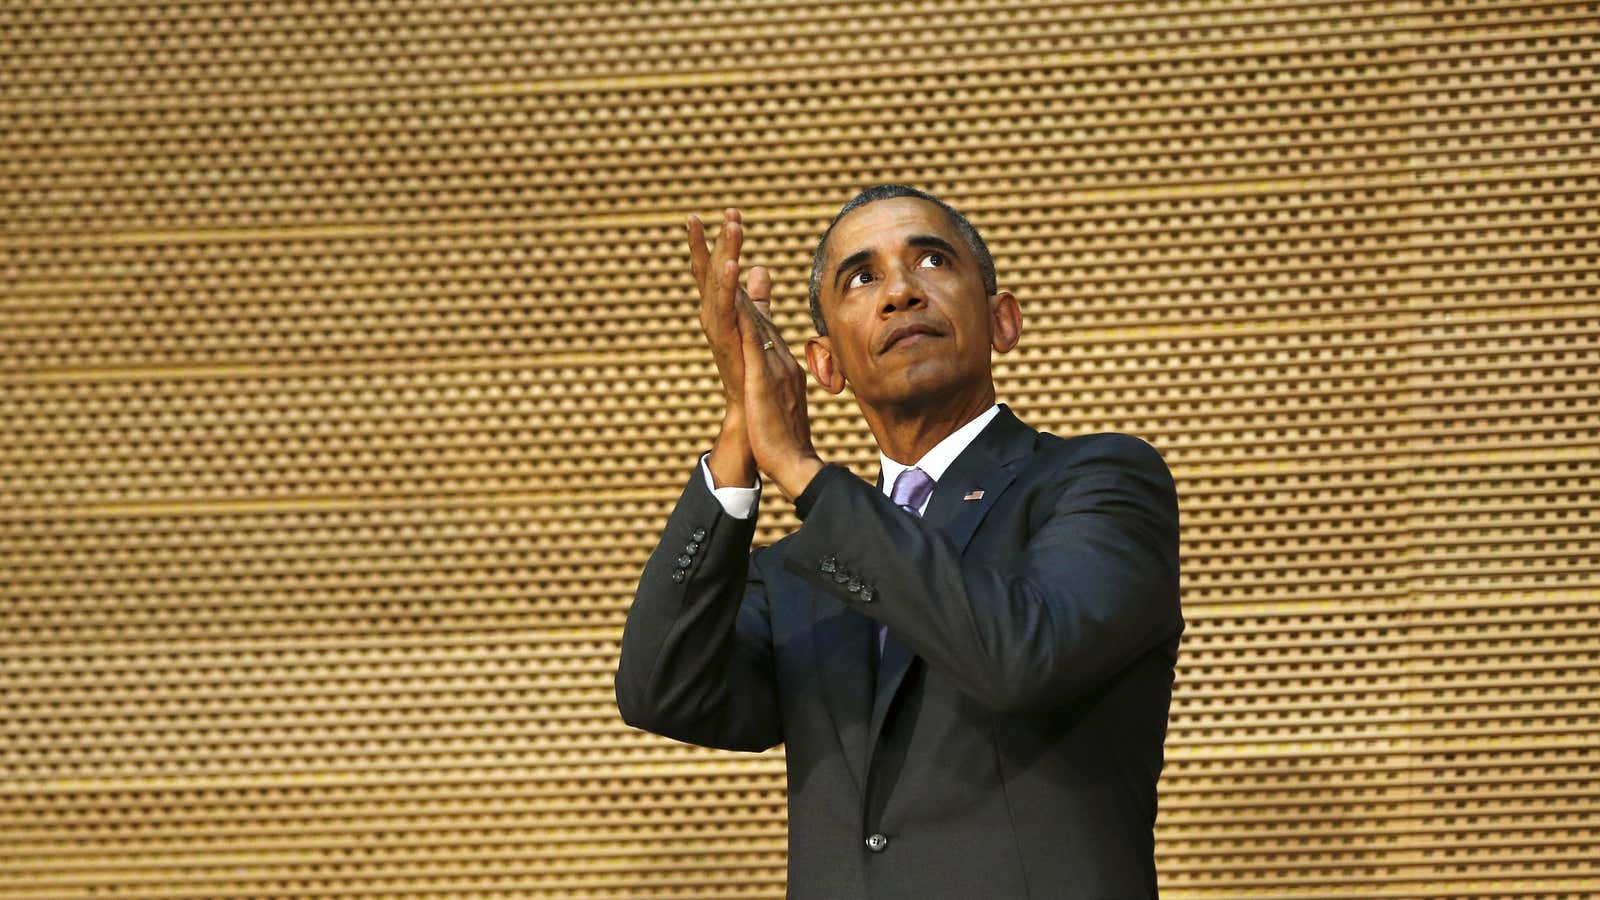 Obama after remarks to the African Union in Addis Ababa in 2015.